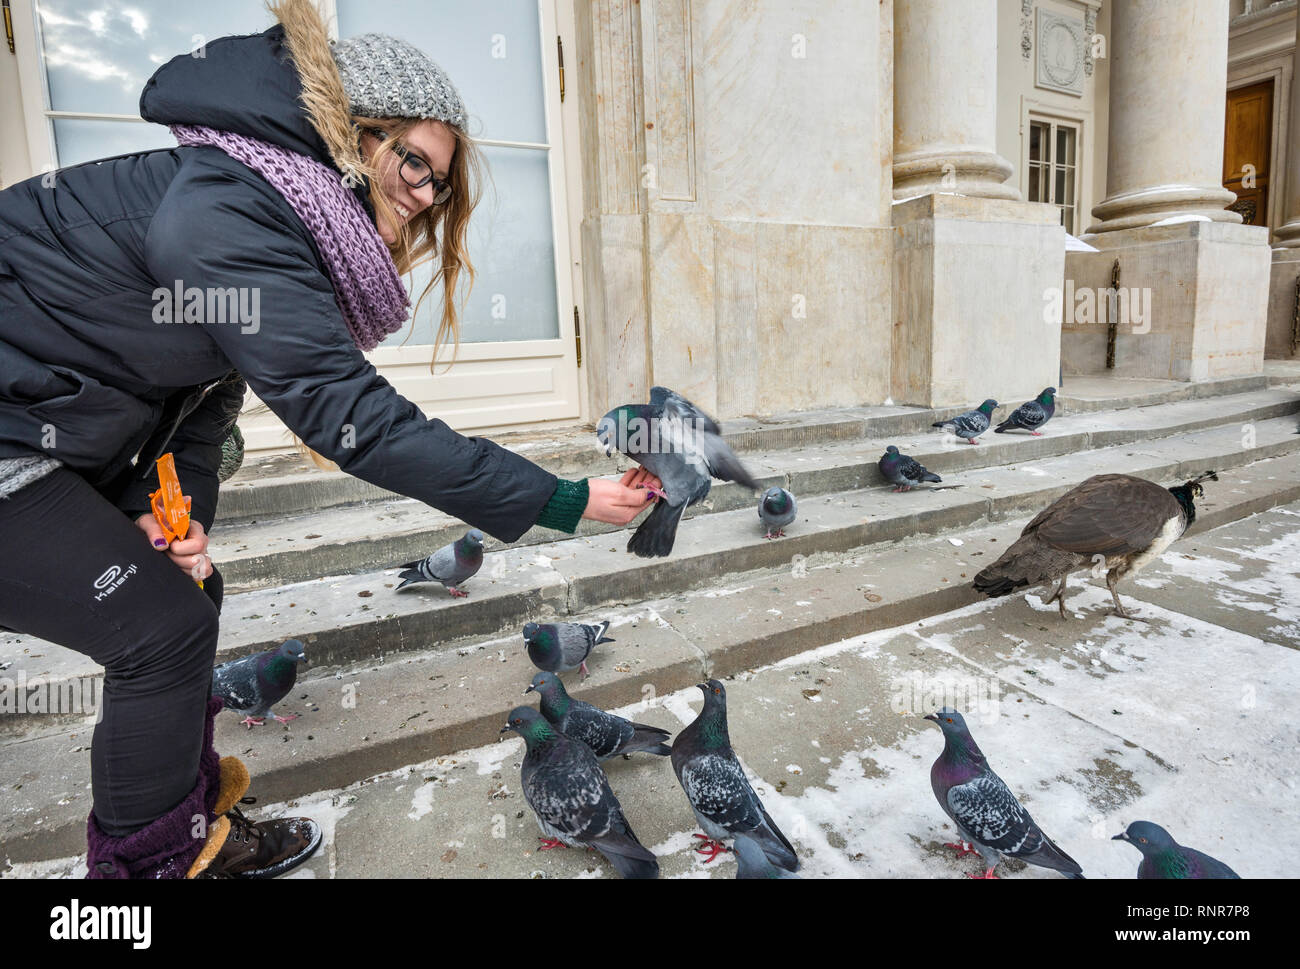 Young woman feeding a pigeon at Lazienki Palace in Warsaw, Poland Stock Photo